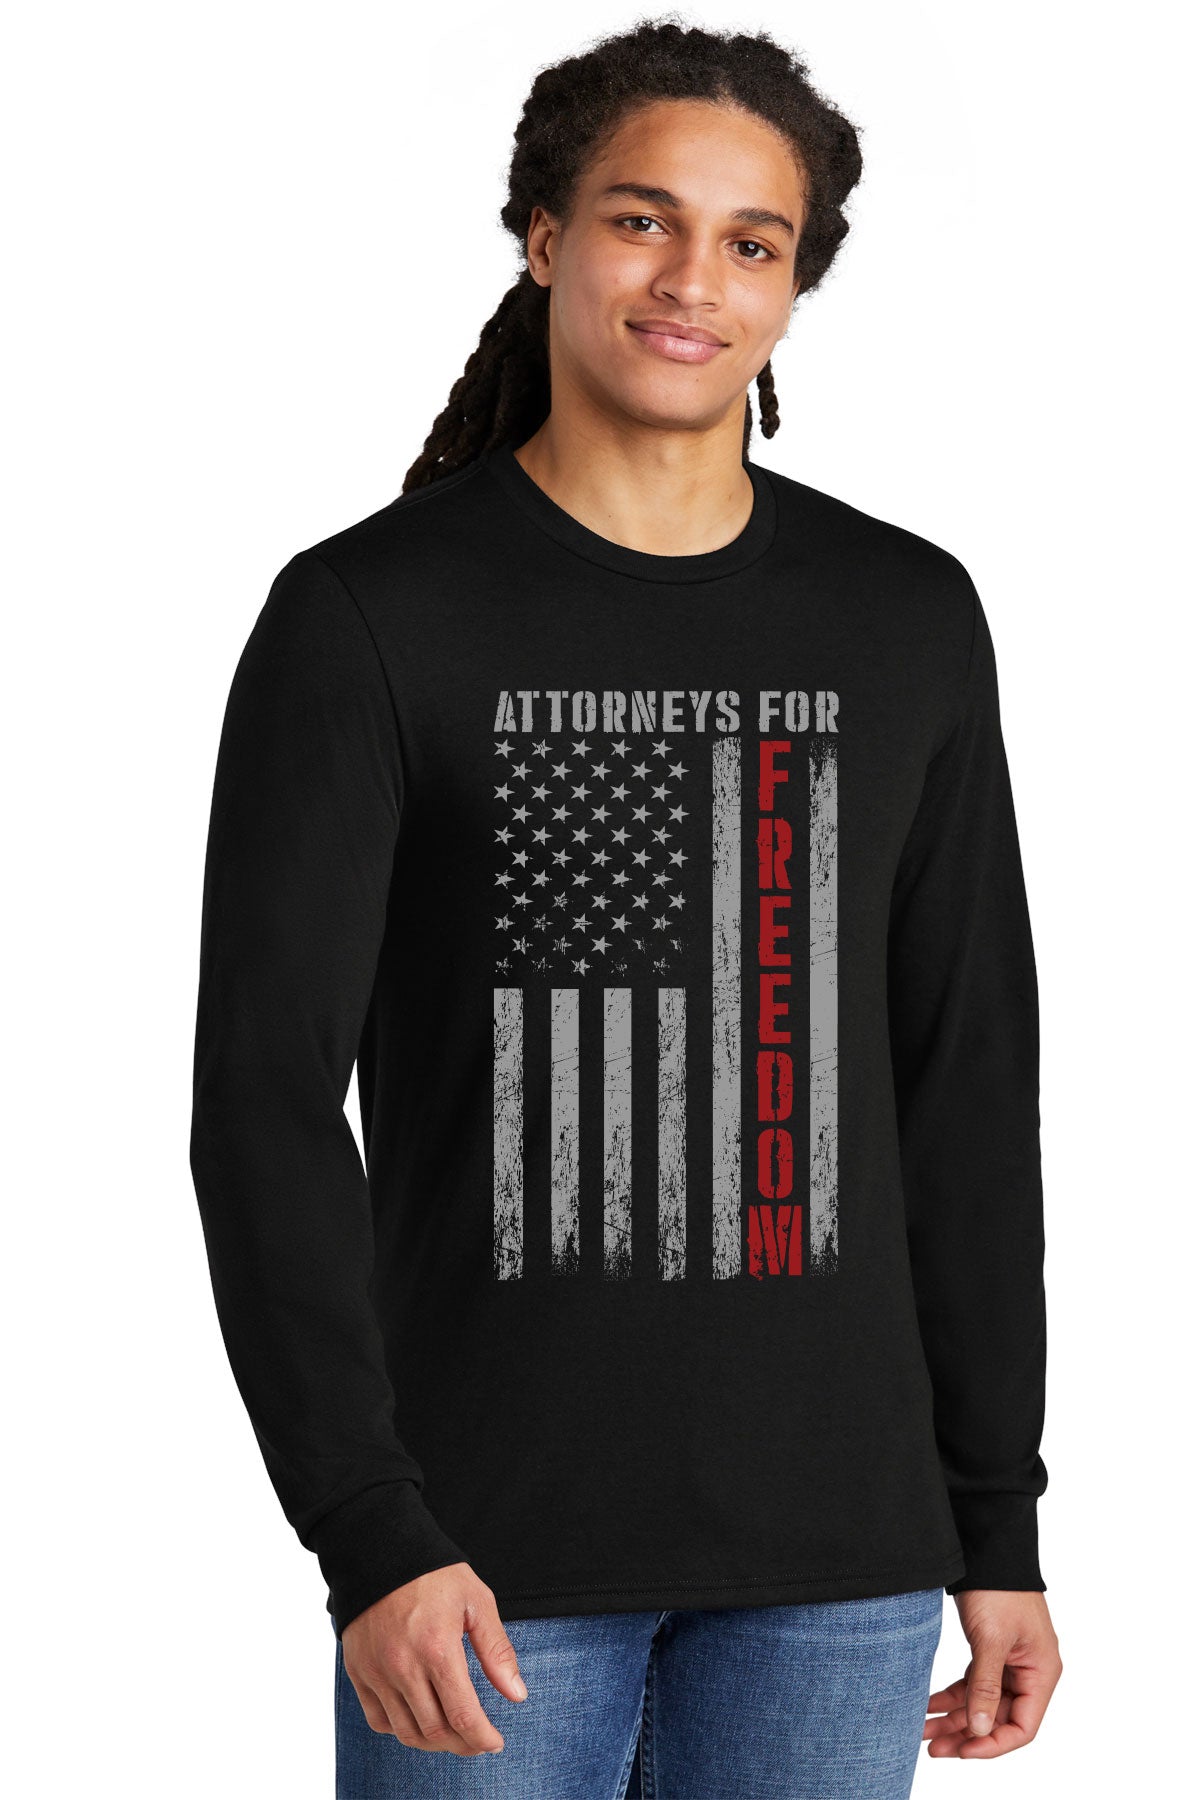 Attorneys For Freedom Flag Long Sleeve